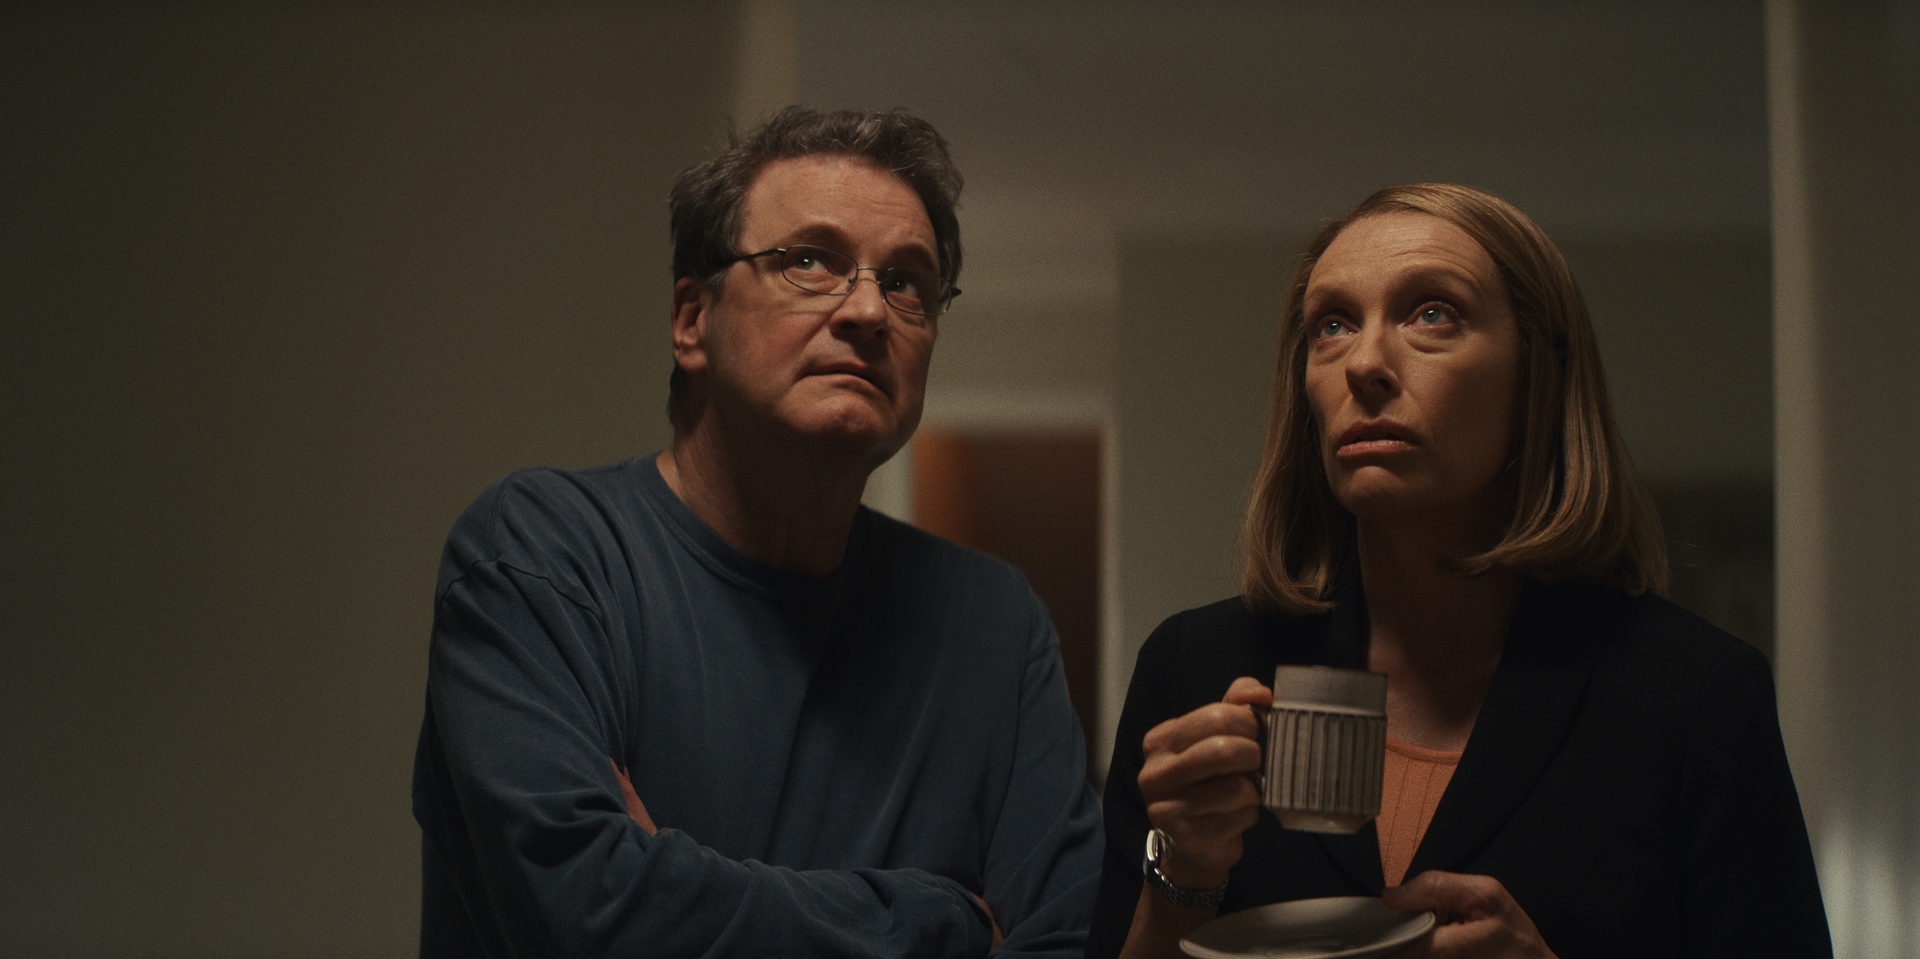 Michael Peterson (Colin Firth) and his wife Kathleen Peterson (Toni Collette) in the fictional story 'The Staircase'